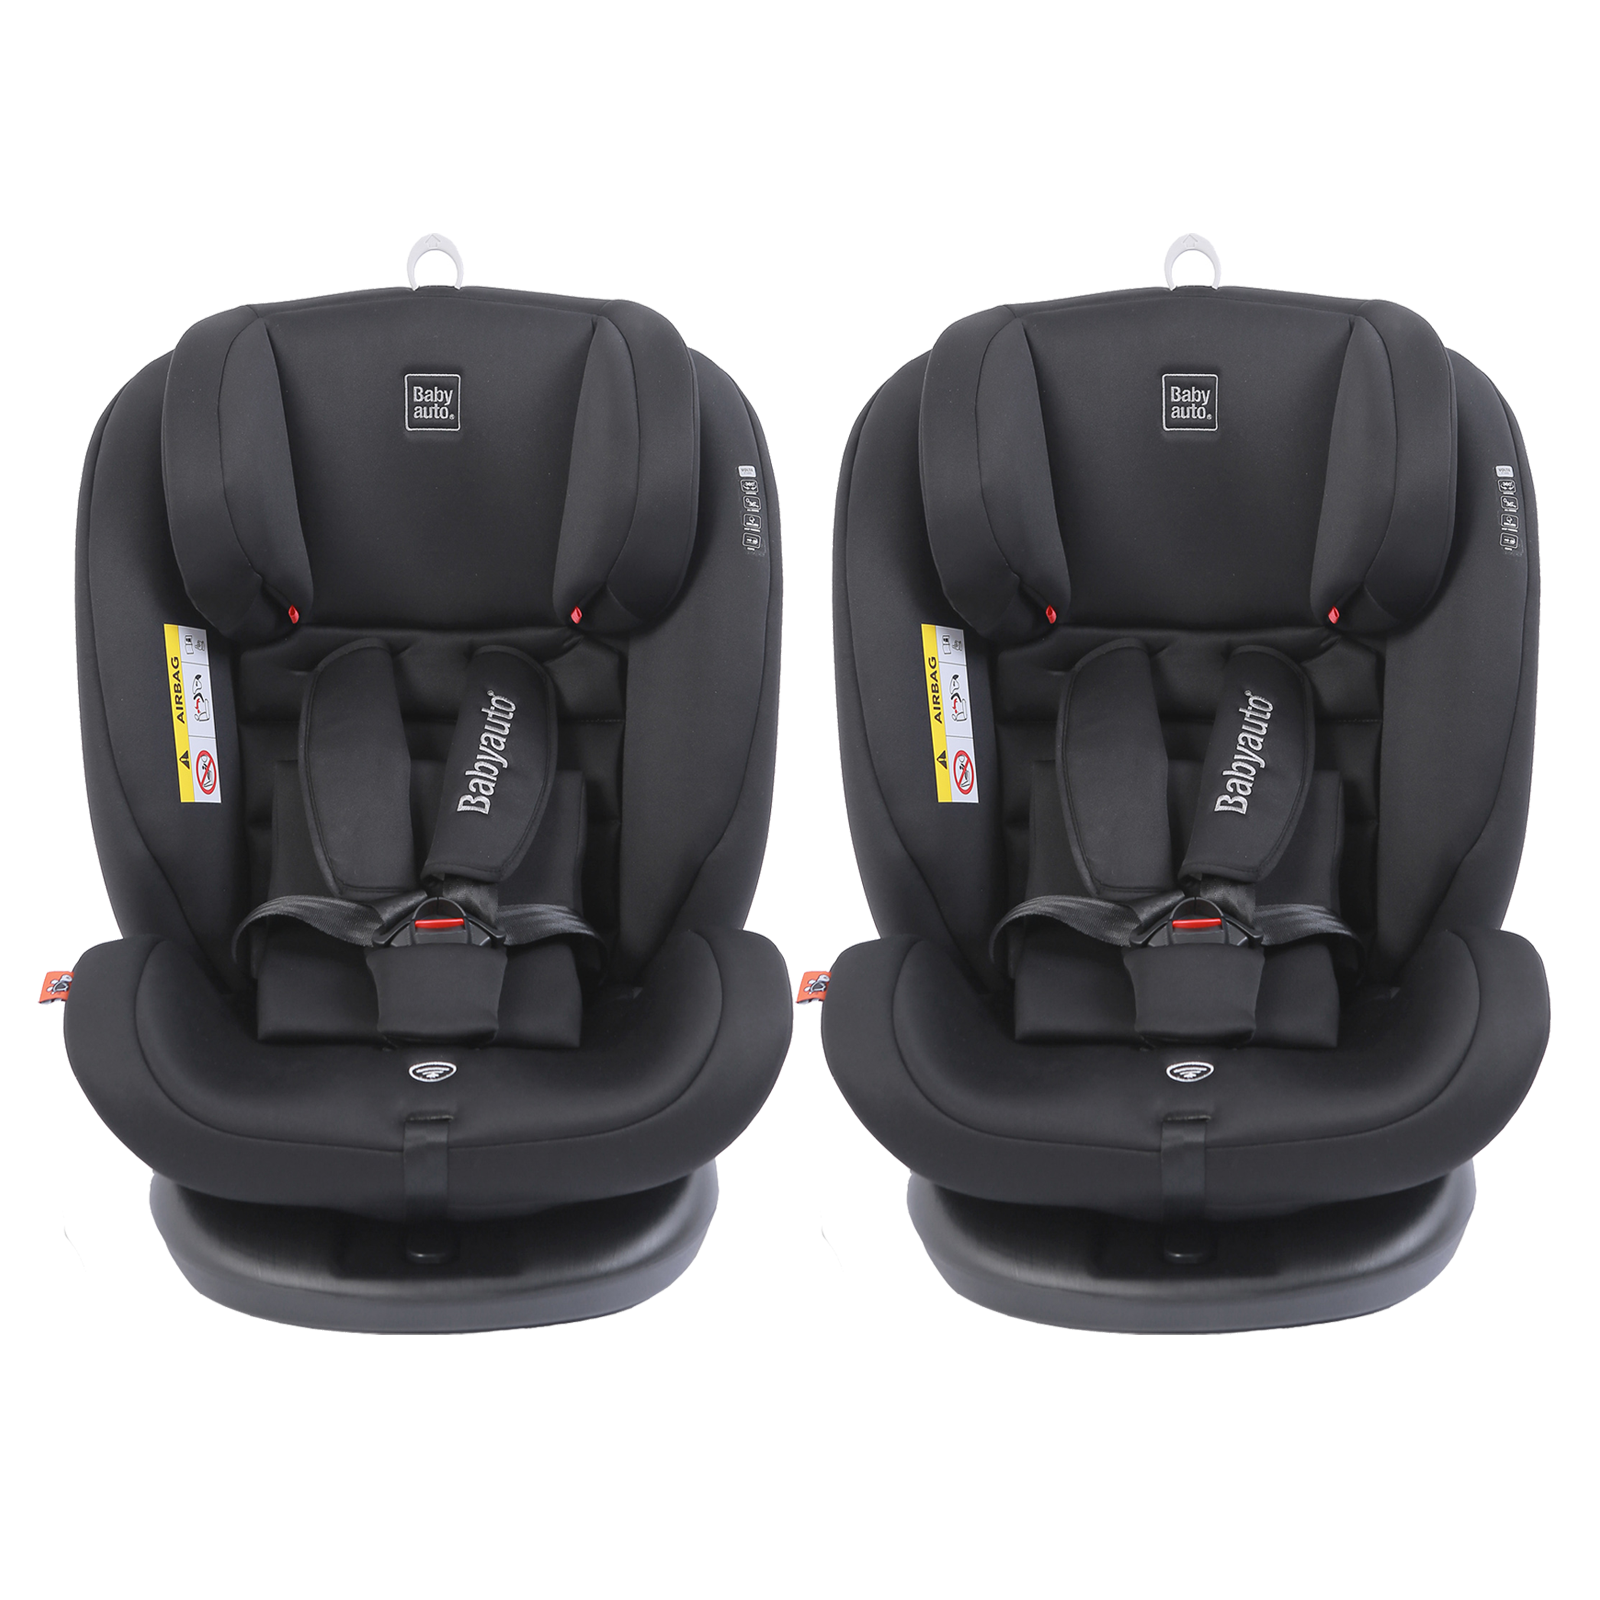 Babyauto Volta Spin Rotate Group 0+1/2/3 ISOFIX Car Seat - Black (2 Pack)